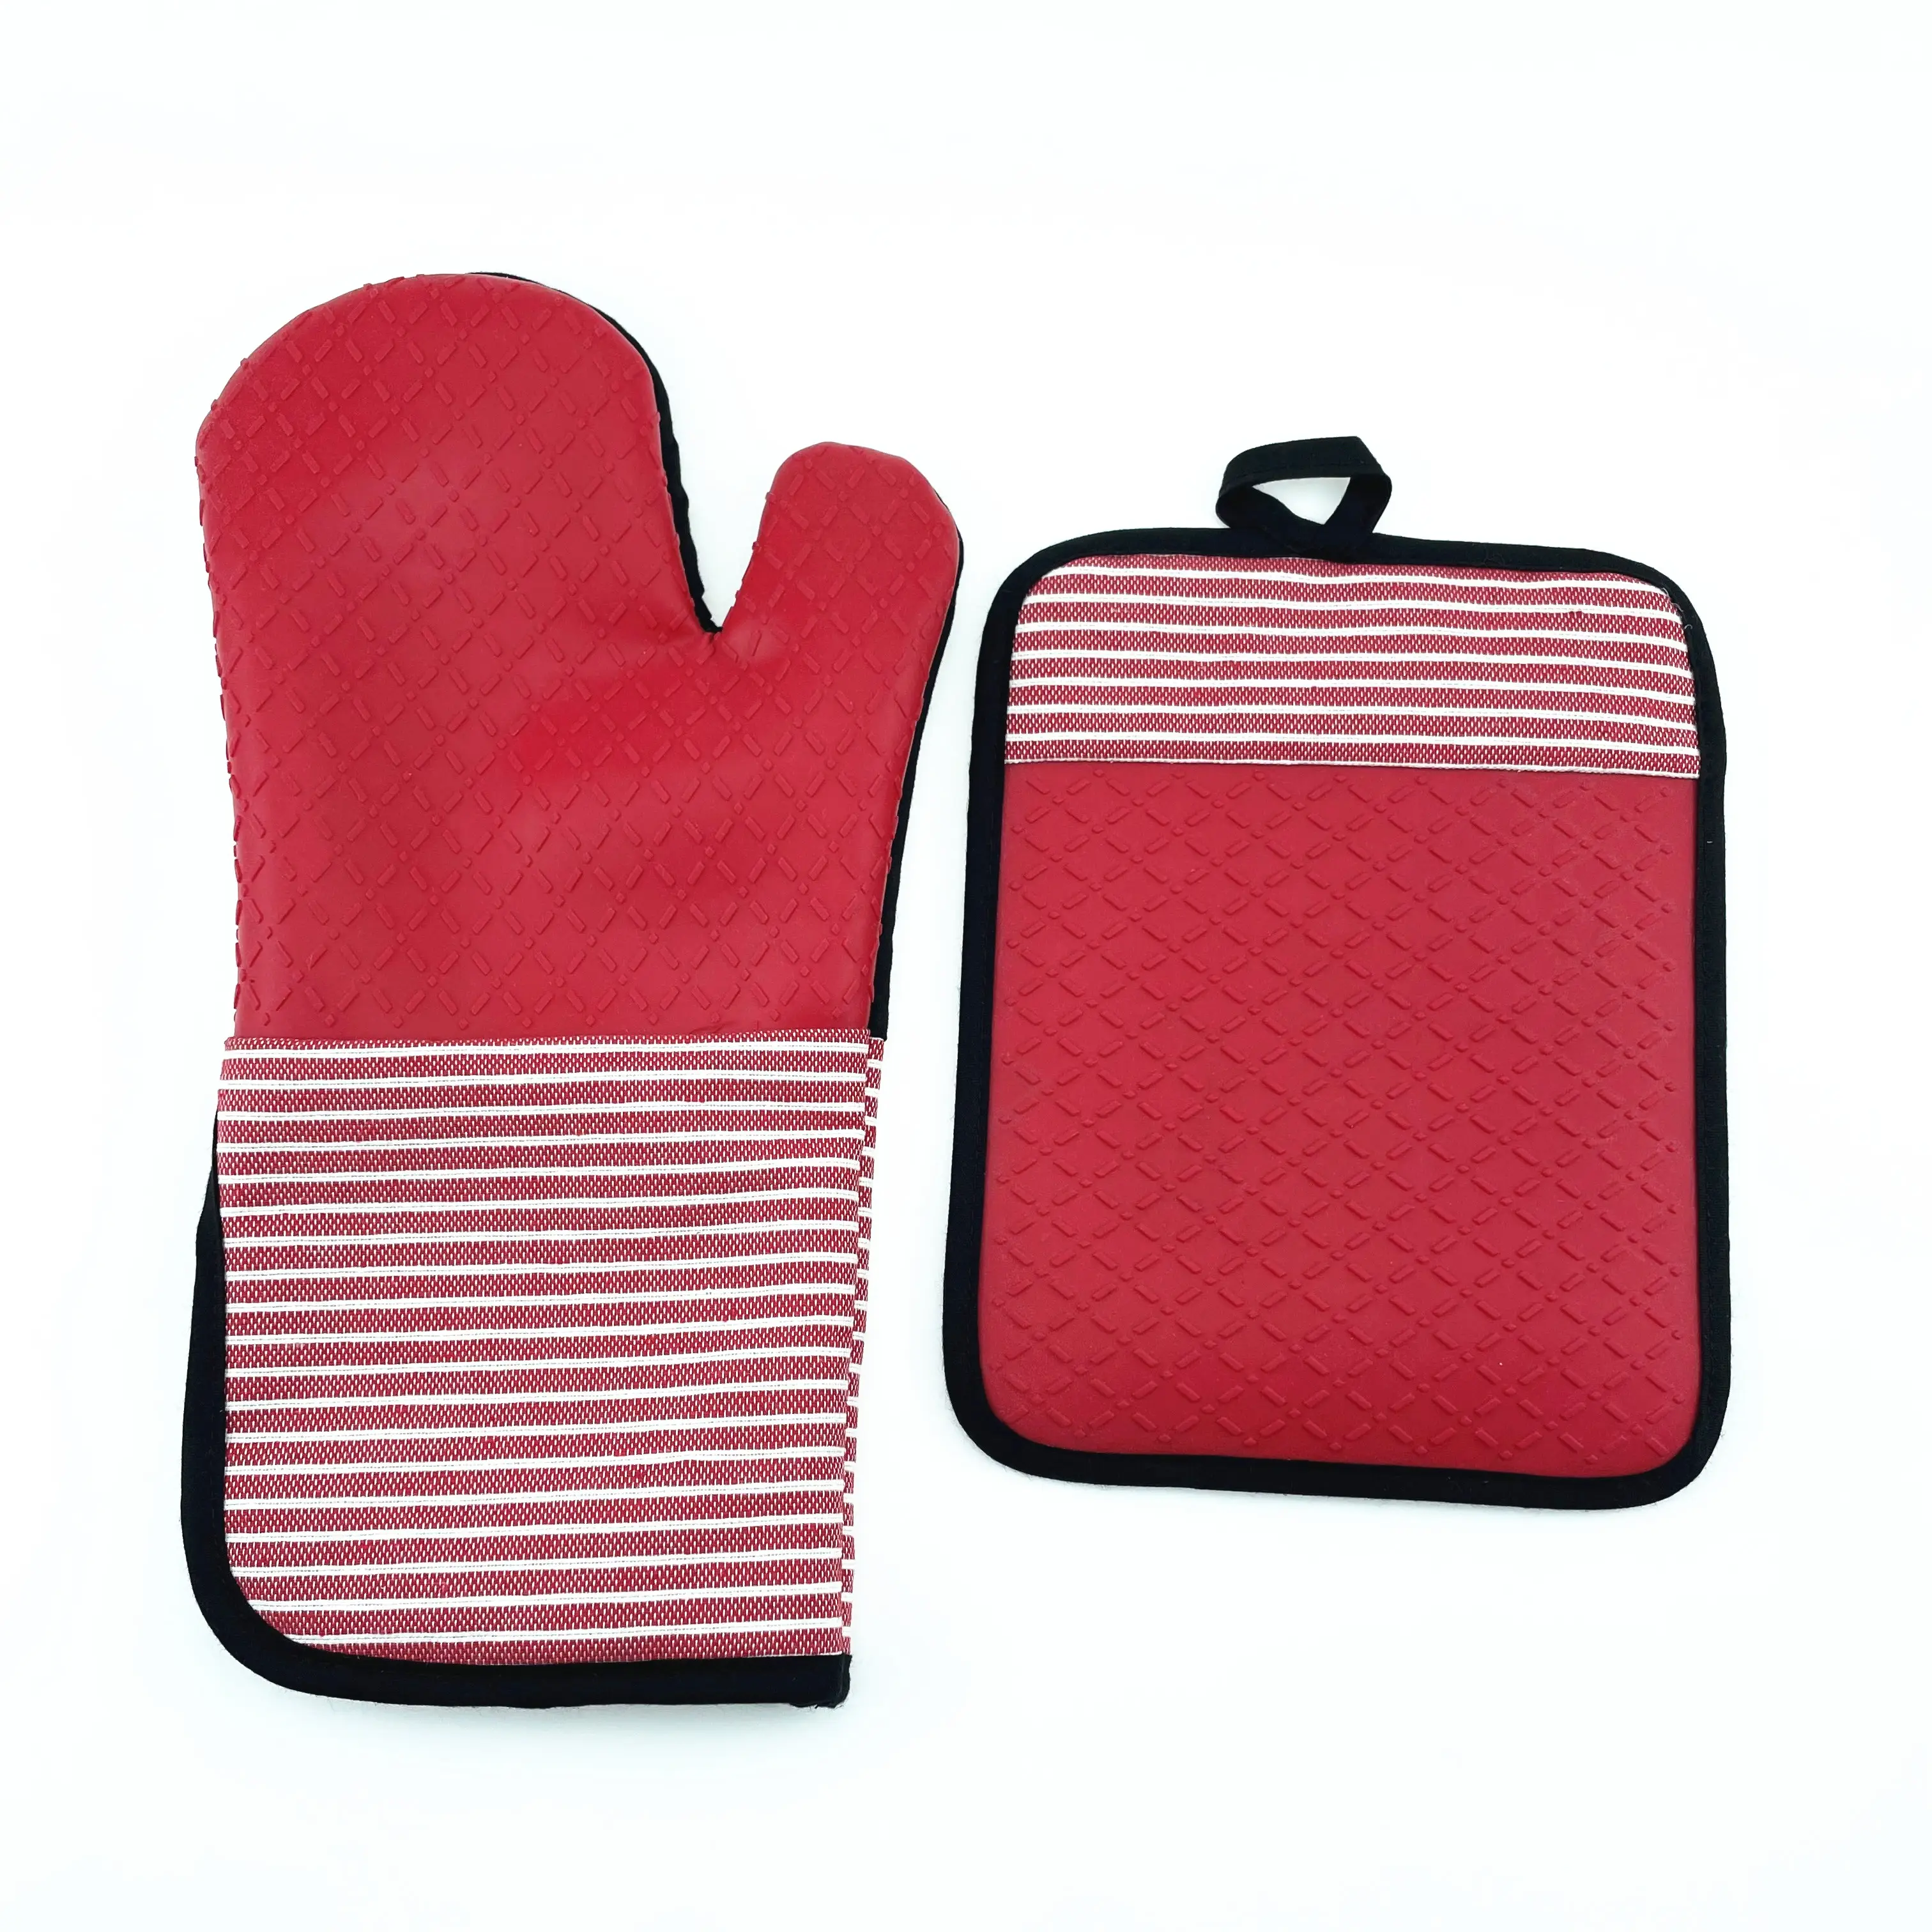 Extra long microwave baking silicone oven mitts and pot holders set